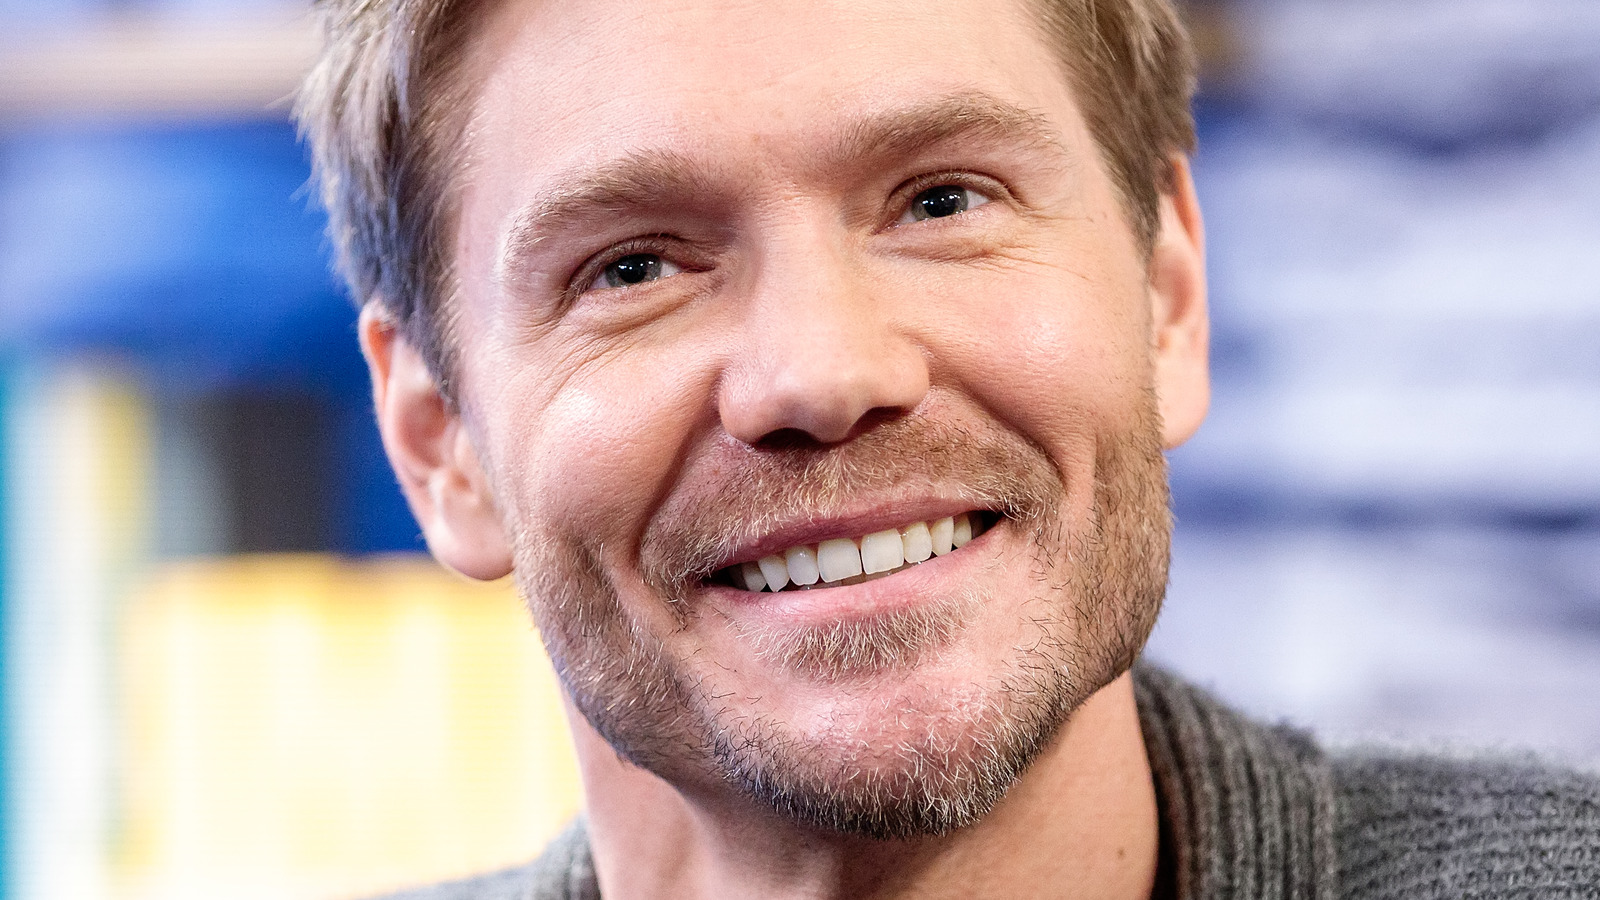 Chad Michael Murray's Latest Role Has Fans Divided